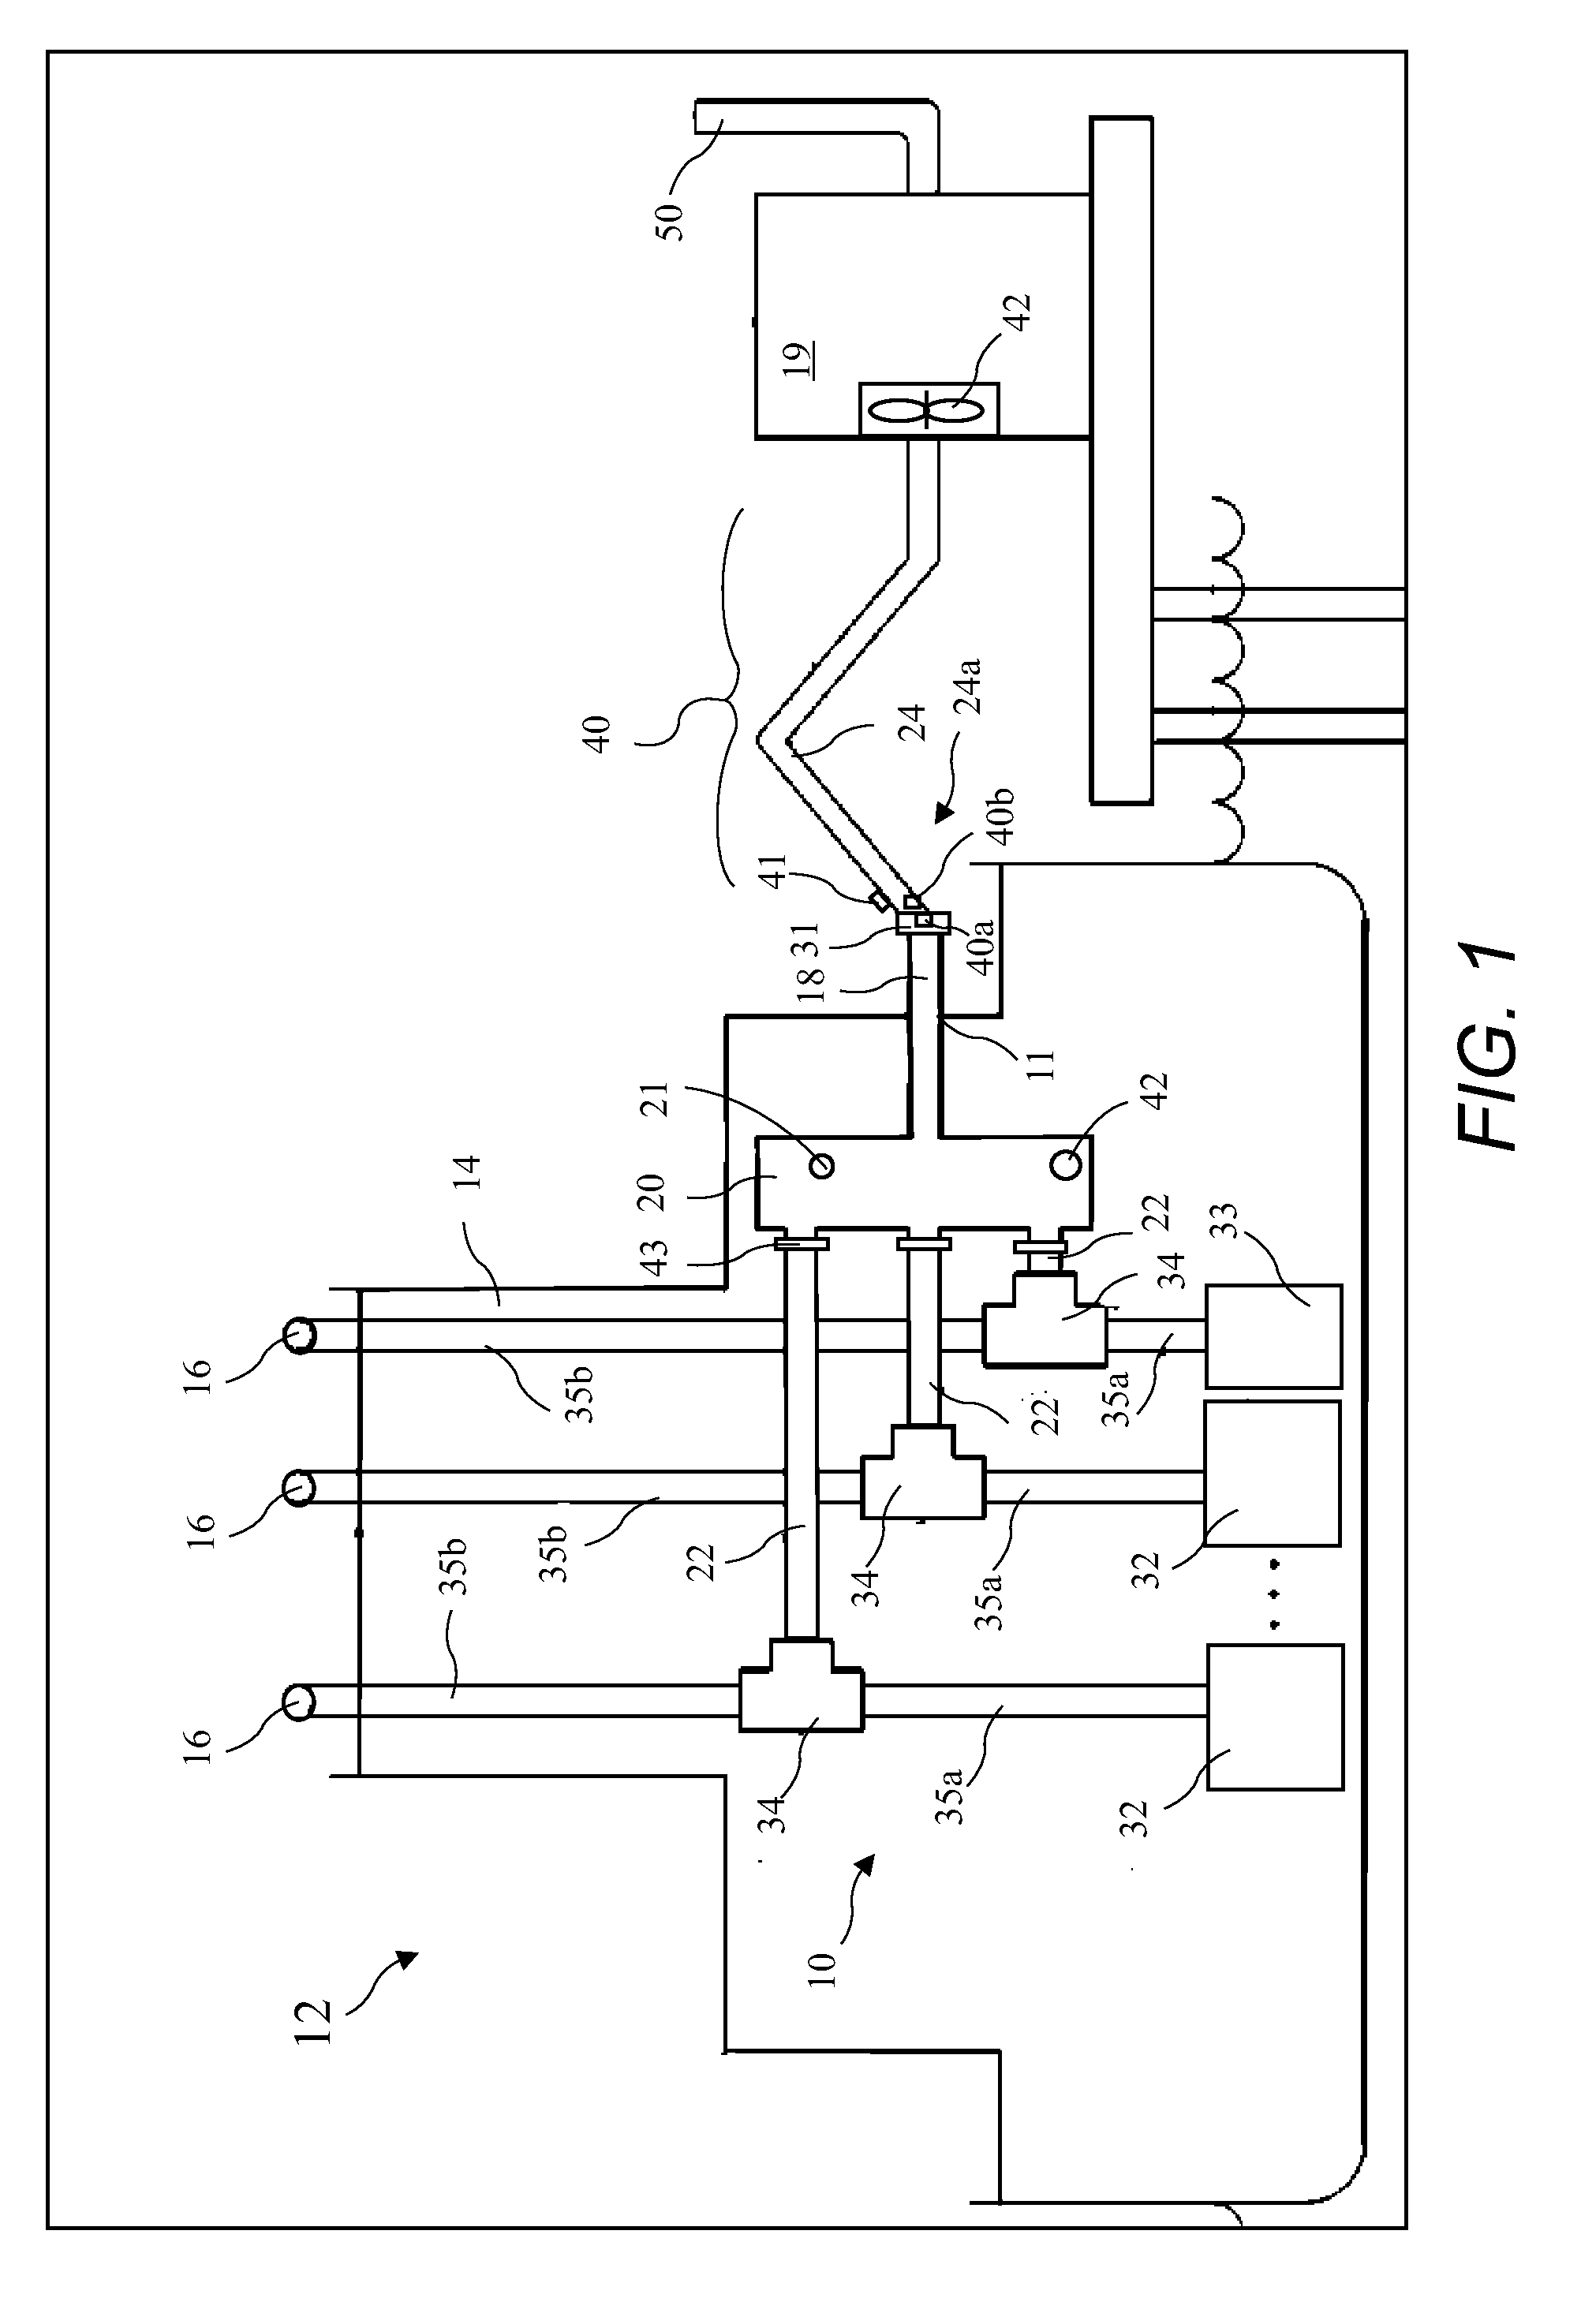 Exhaust Gas Diverter and Collection System For Ocean Going Vessels